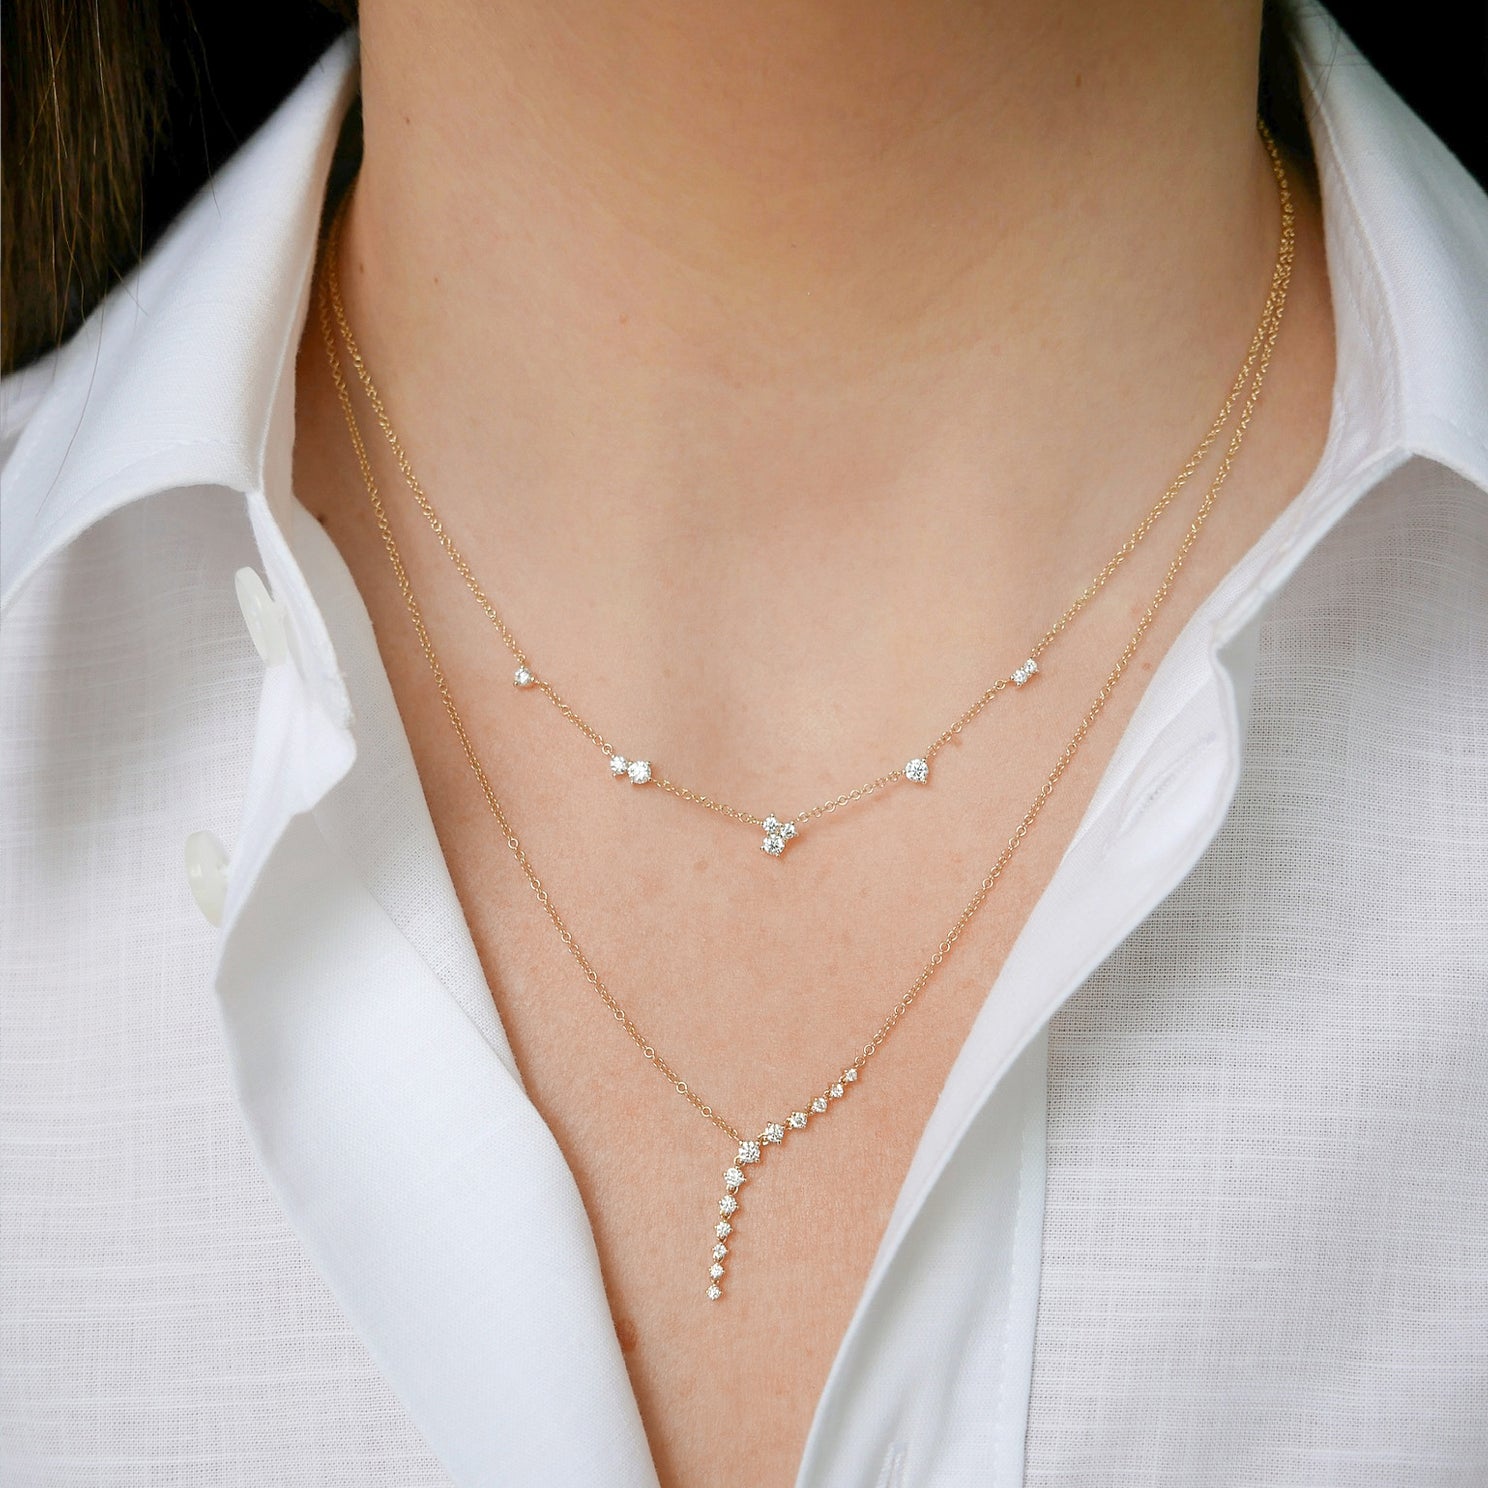 Multi Diamond Cluster Necklace in 14k yellow gold styled on neck of model with diamond waterfall necklace with model in white blouse